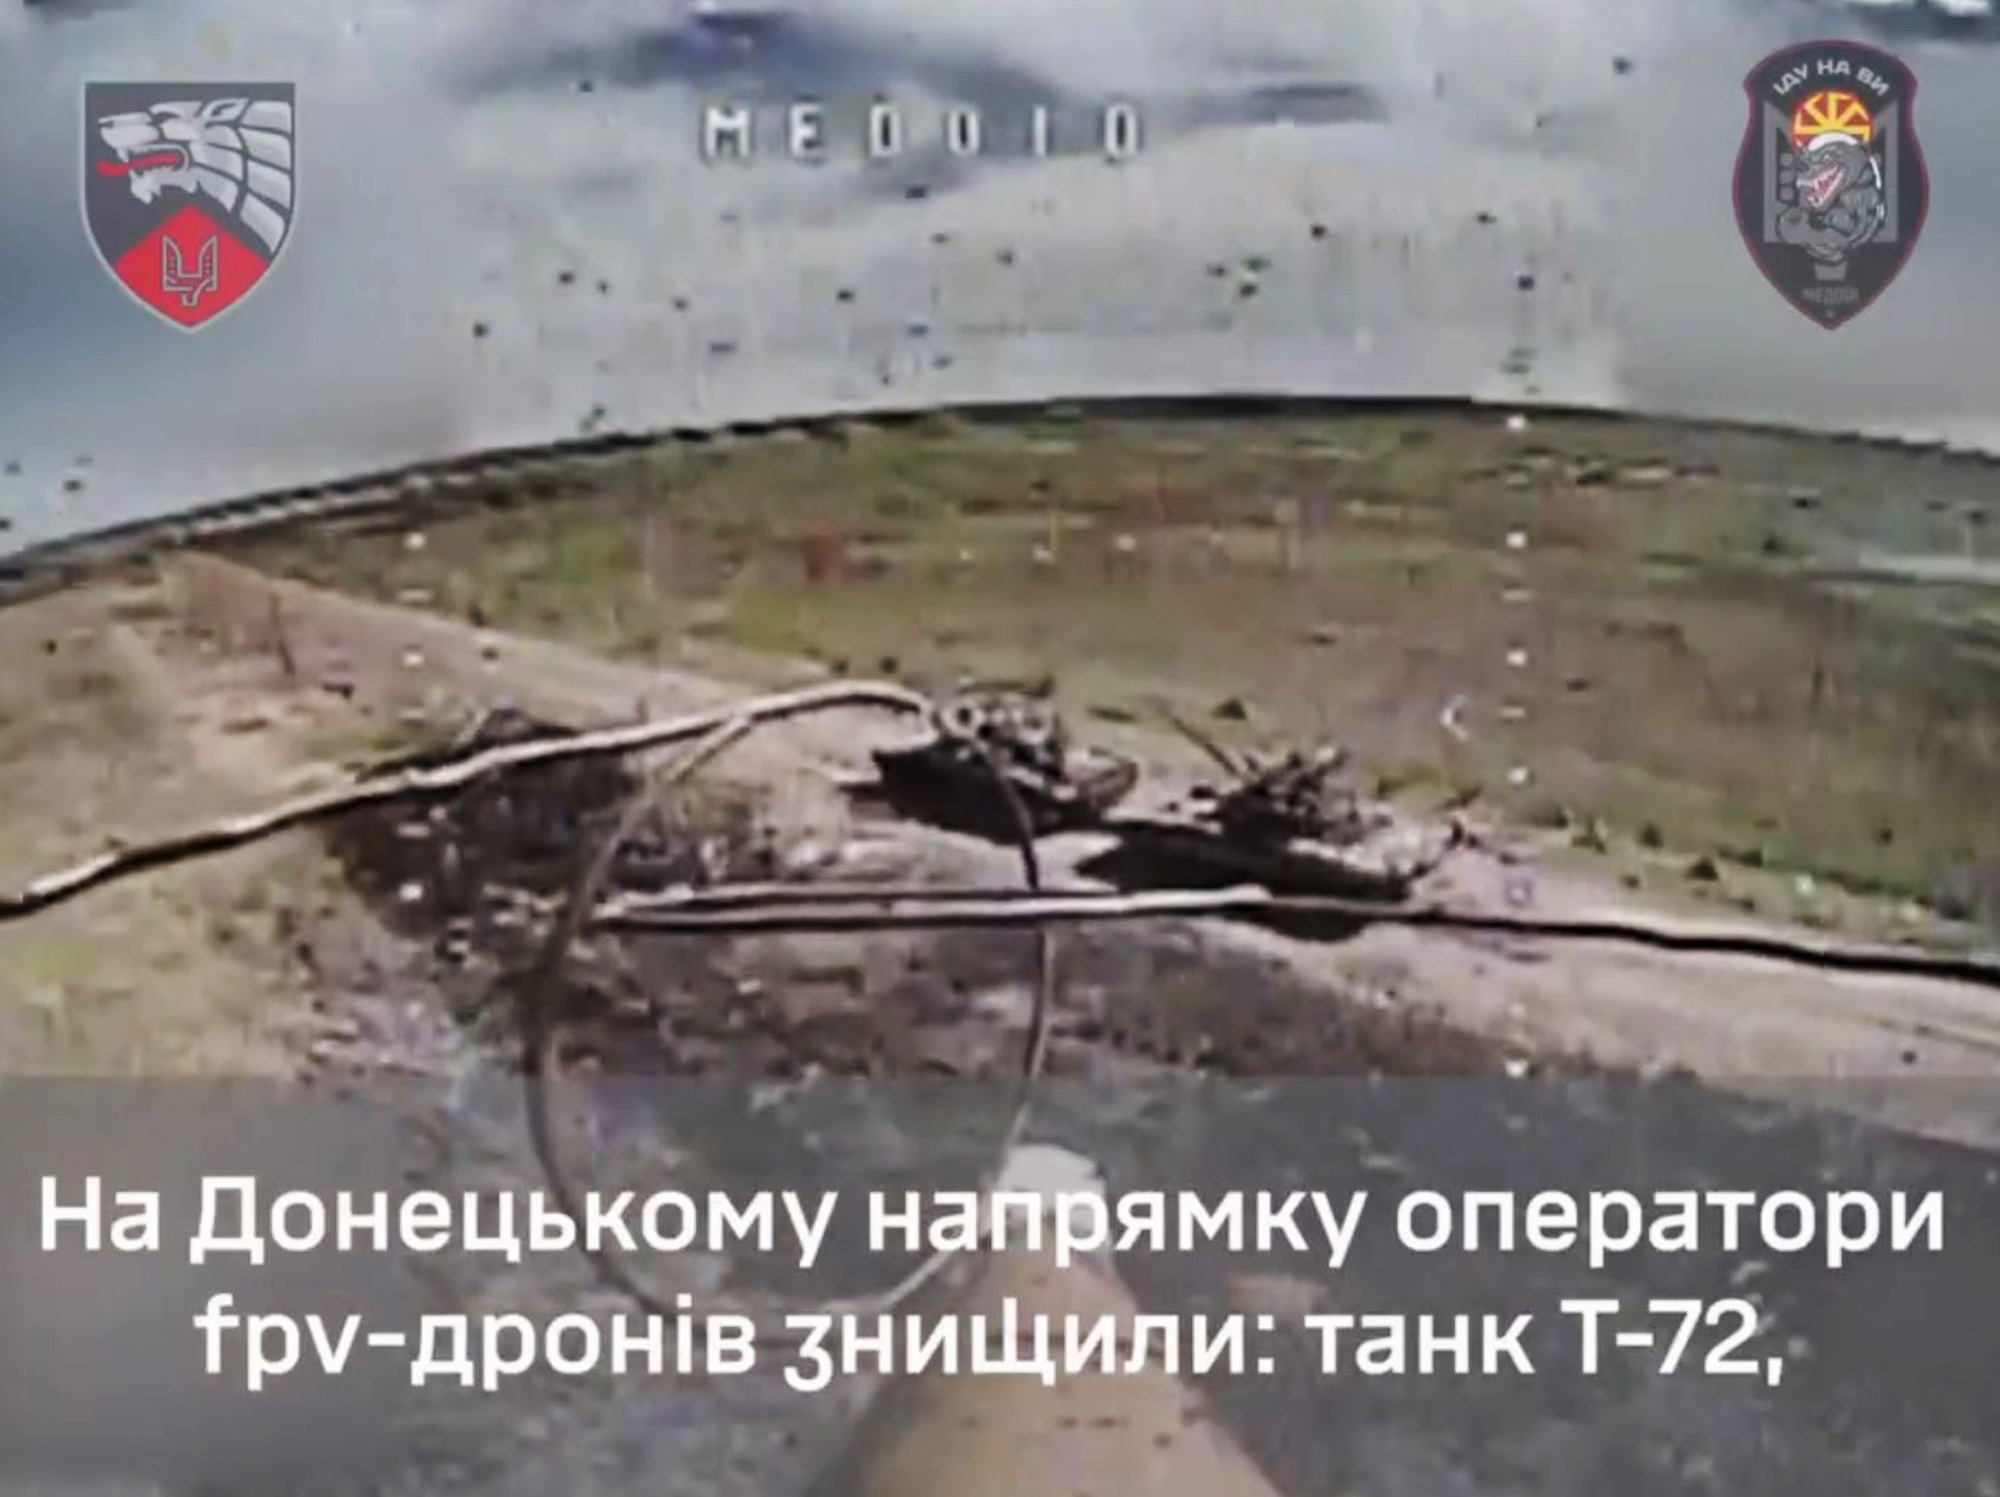 Ukrainian Special Forces Use Kamikaze Drones To Take Out Russian T-72 Tanks And Troops